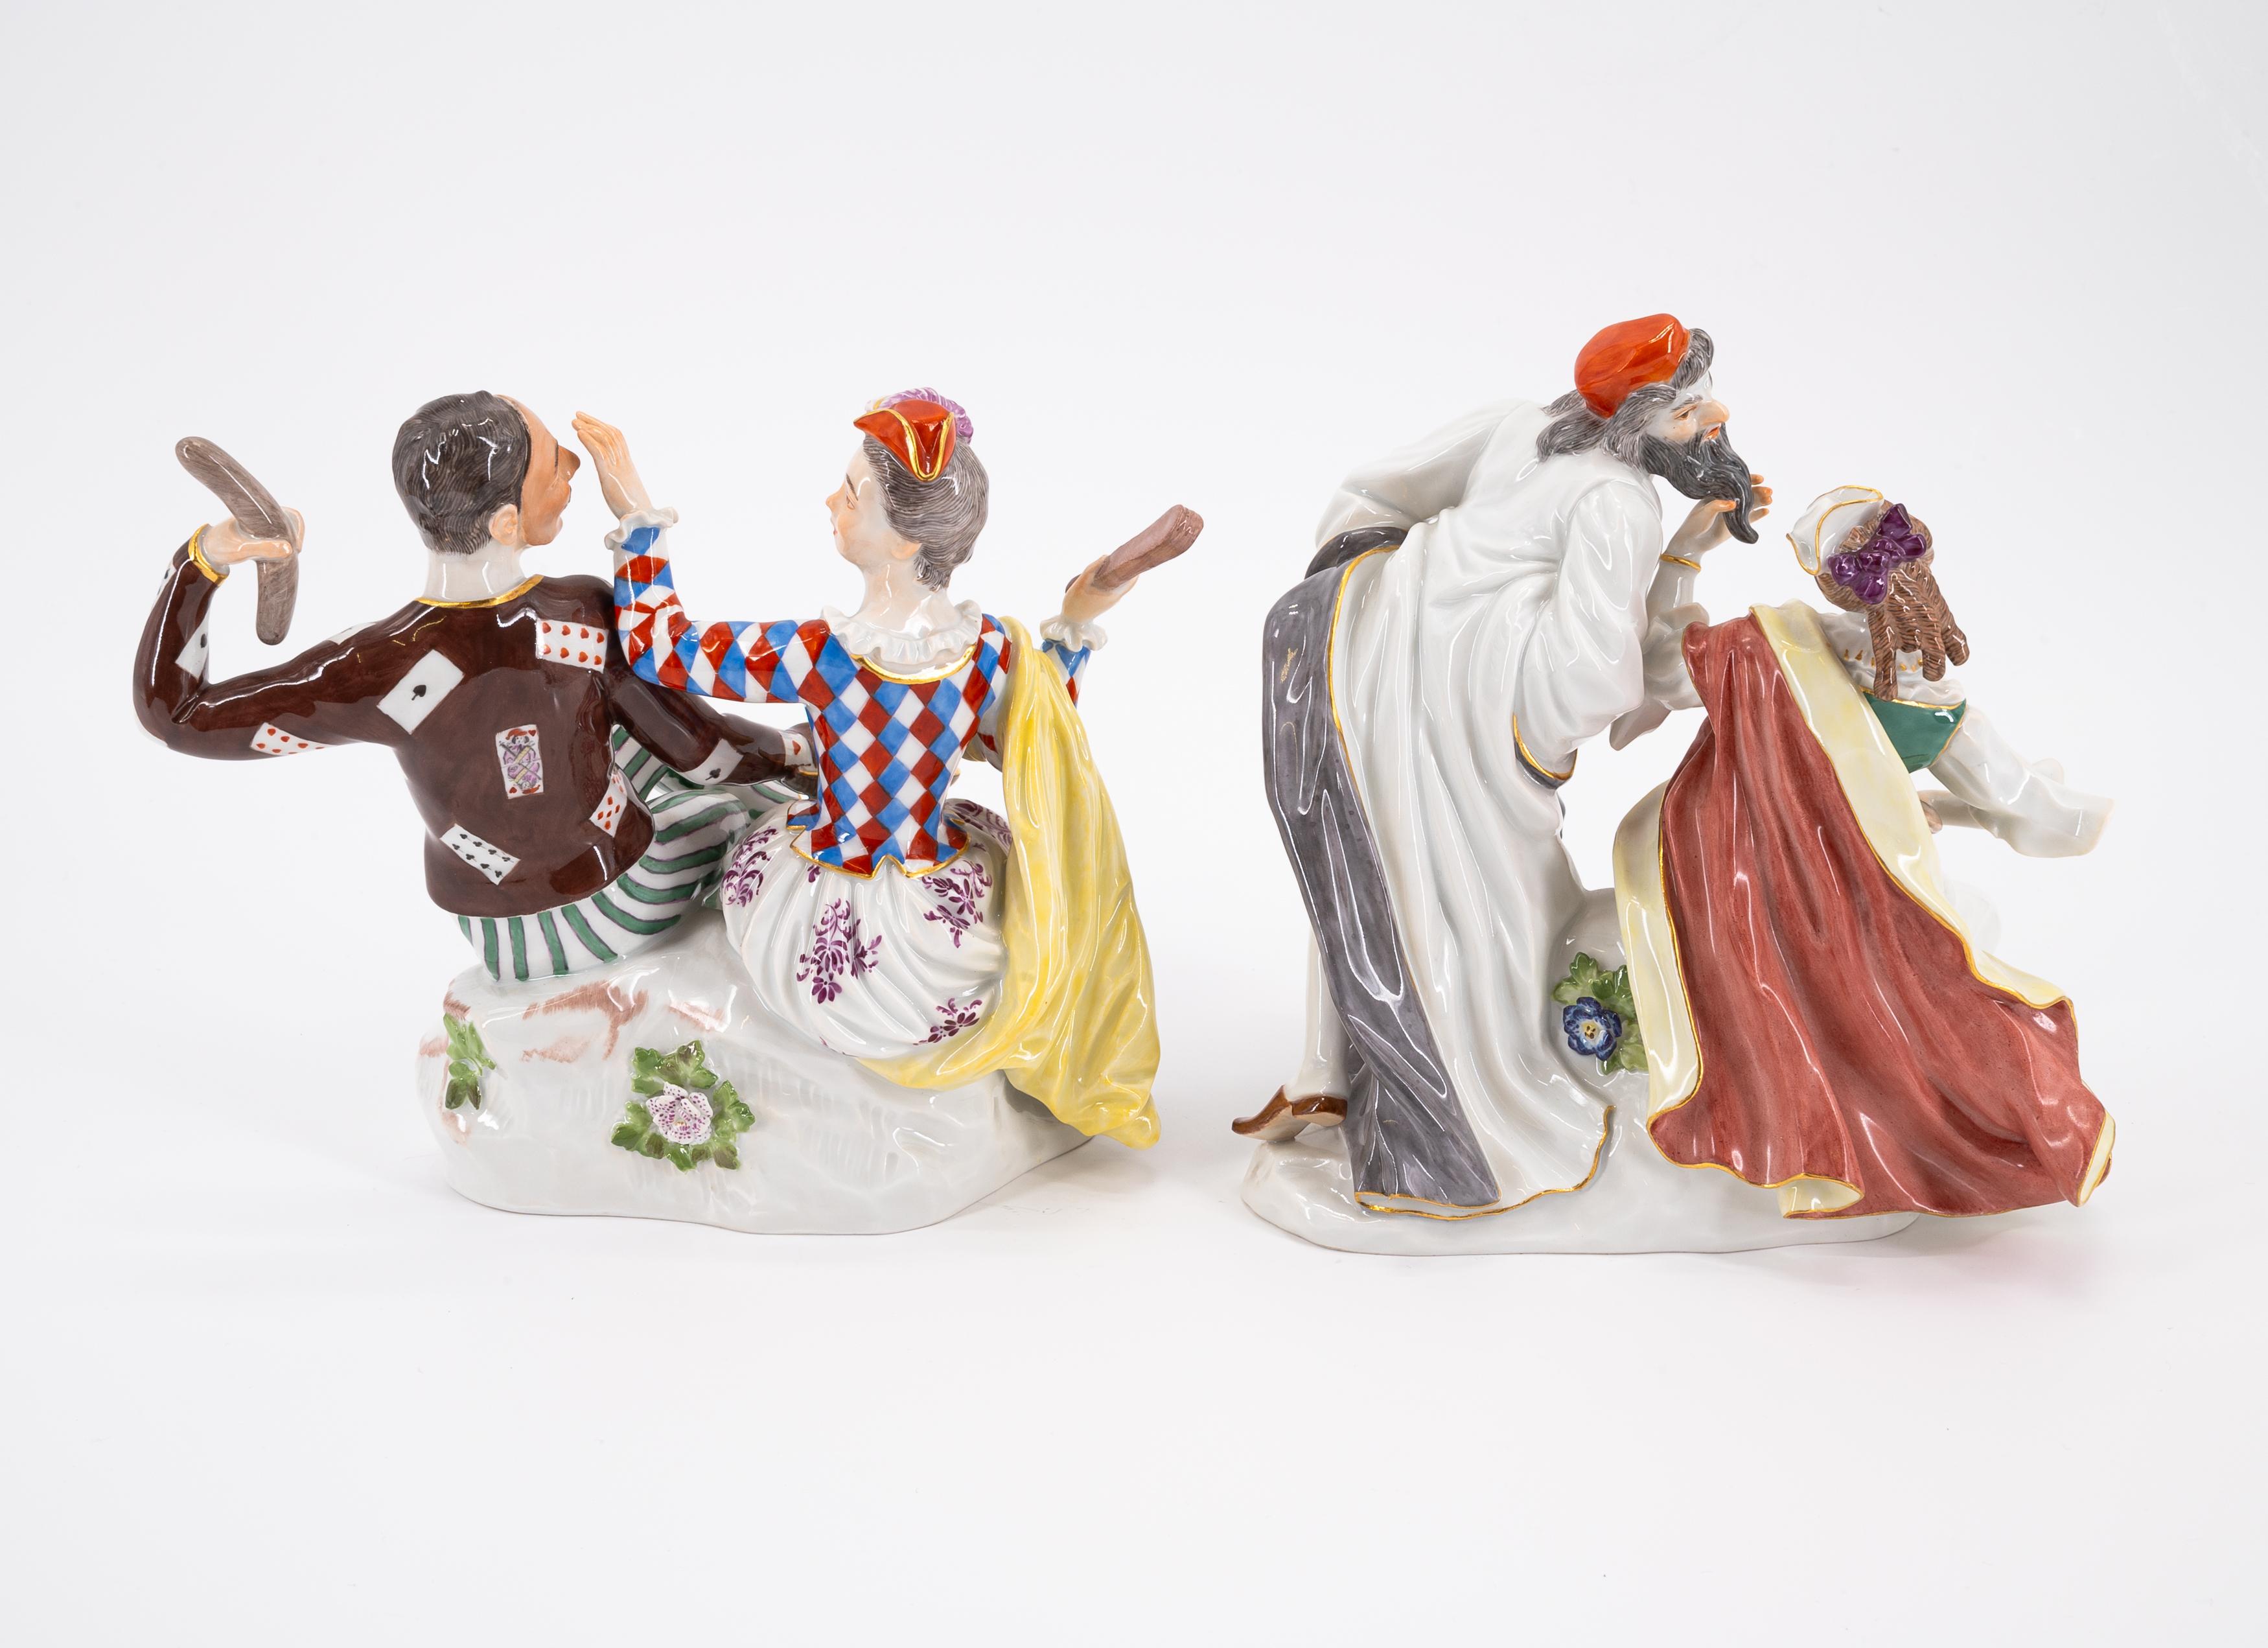 FOUR LARGE PORCELAIN COUPLES FROM THE COMMEDIA DELL'ARTE - Image 7 of 9